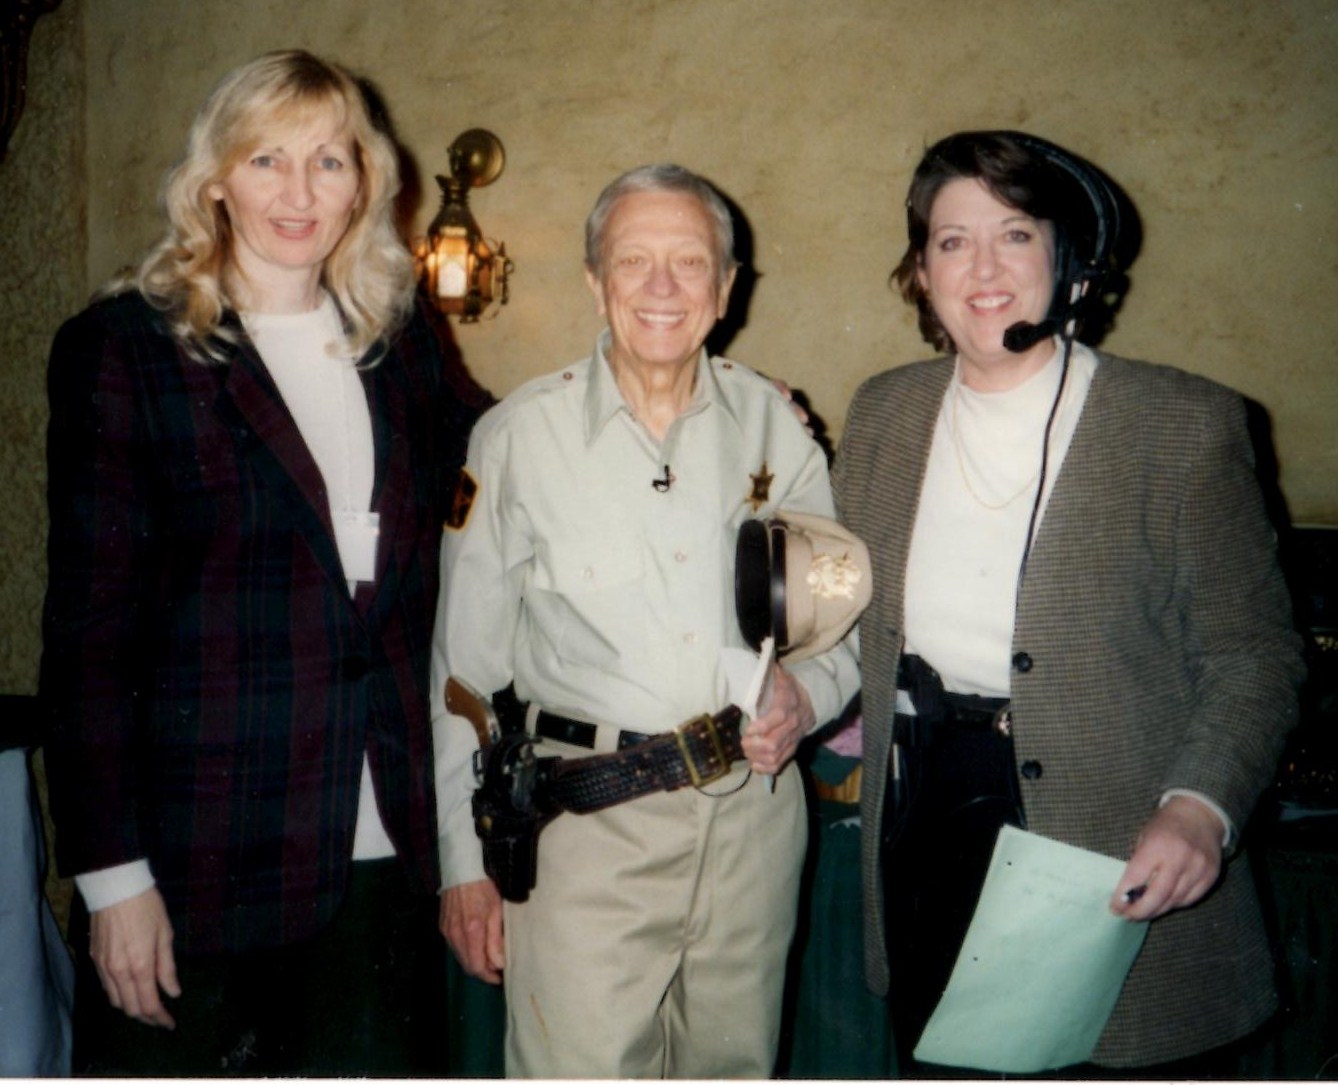 On set with Don Knotts